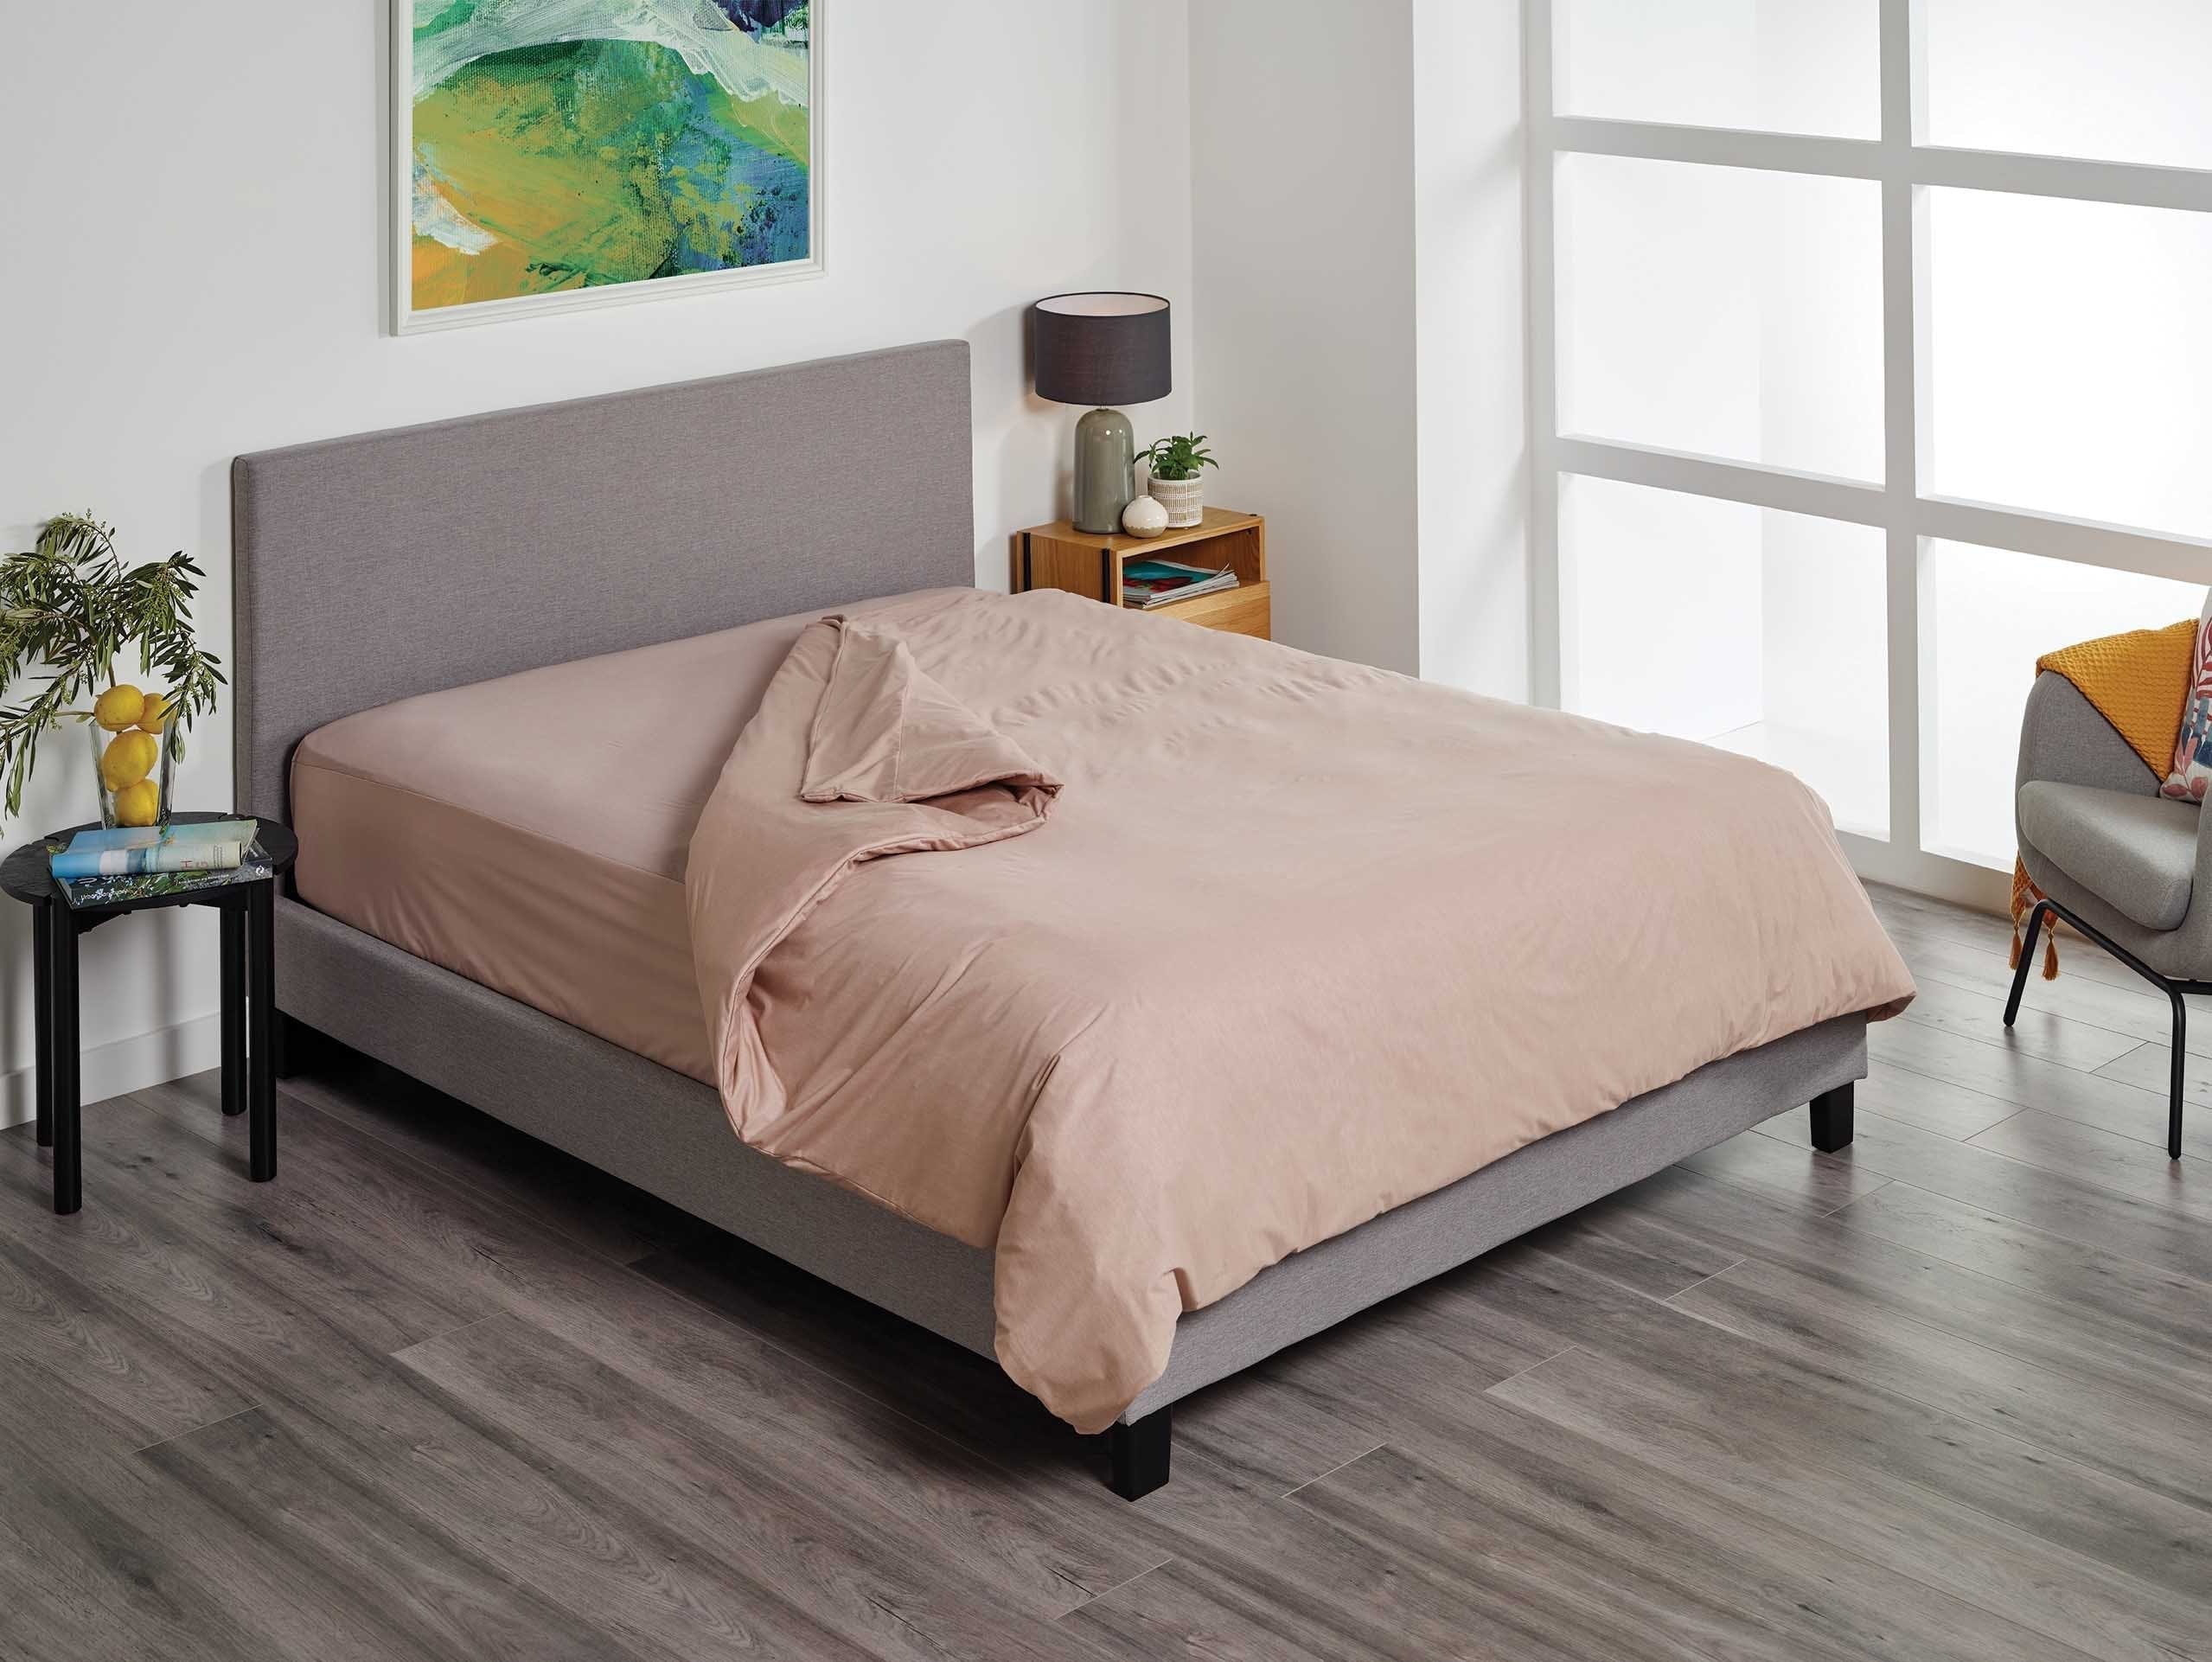 Protect A Bed King-Single / Latte Fusion Quilt Cover SNUF0344KSG0__EA